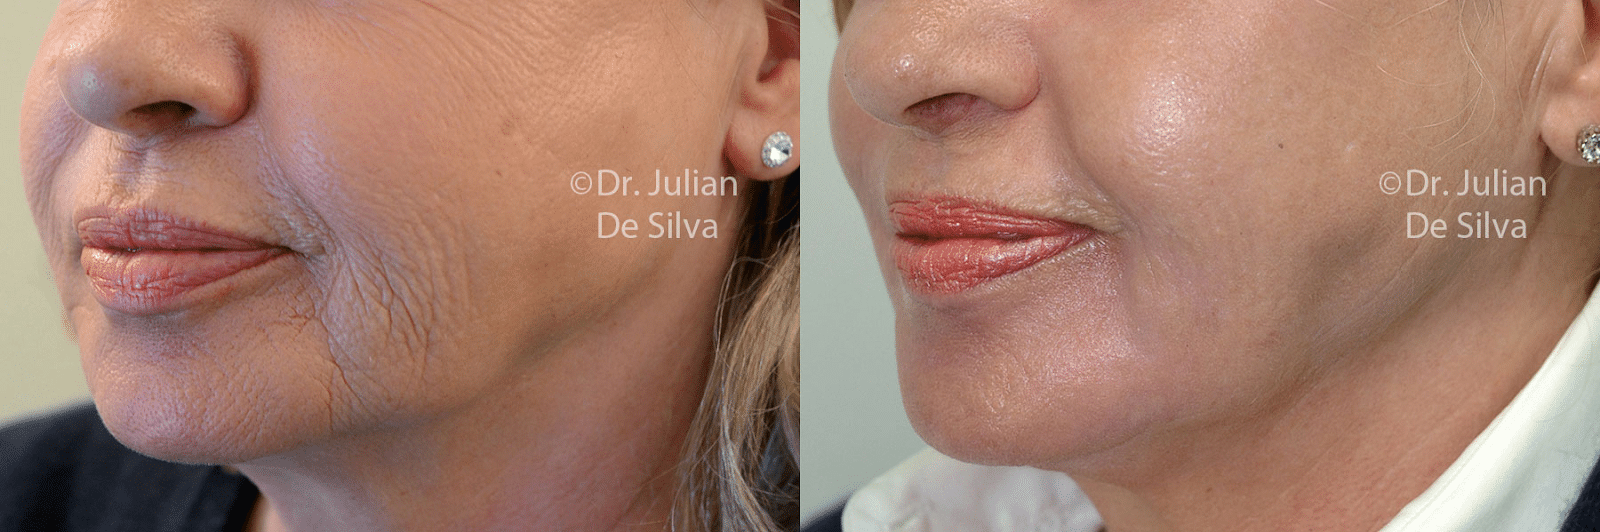 Dermapen and micro-needling are both effective skin rejuvenation treatments.